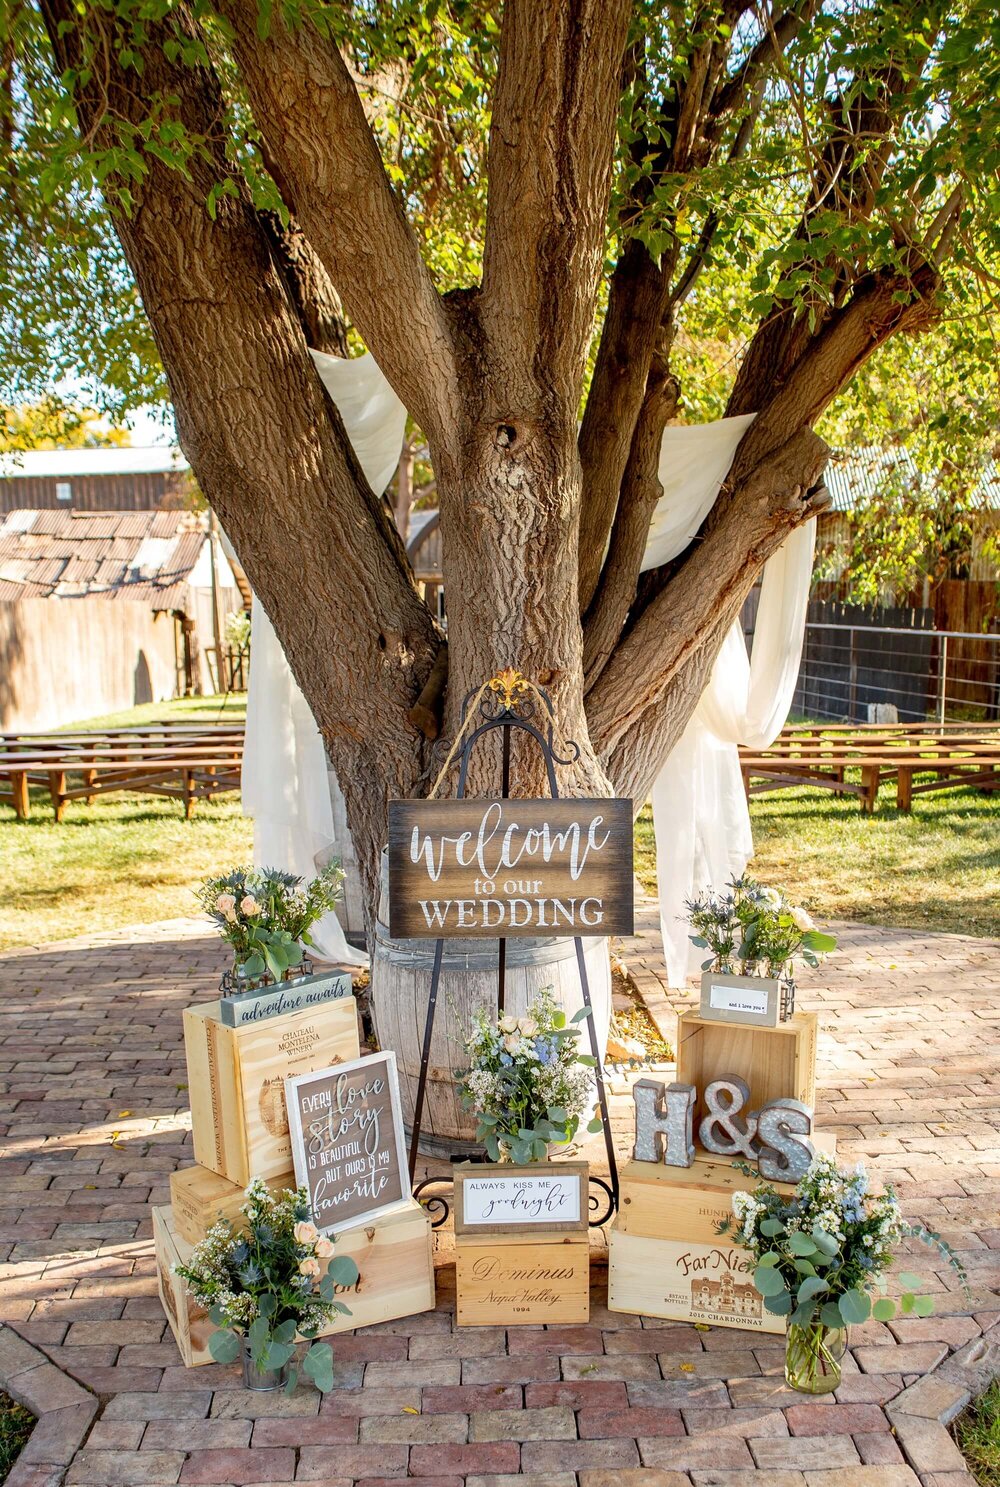 Wedding welcome sign at The Barn at UVX Rustic Ranch in Cottonwood, Arizona